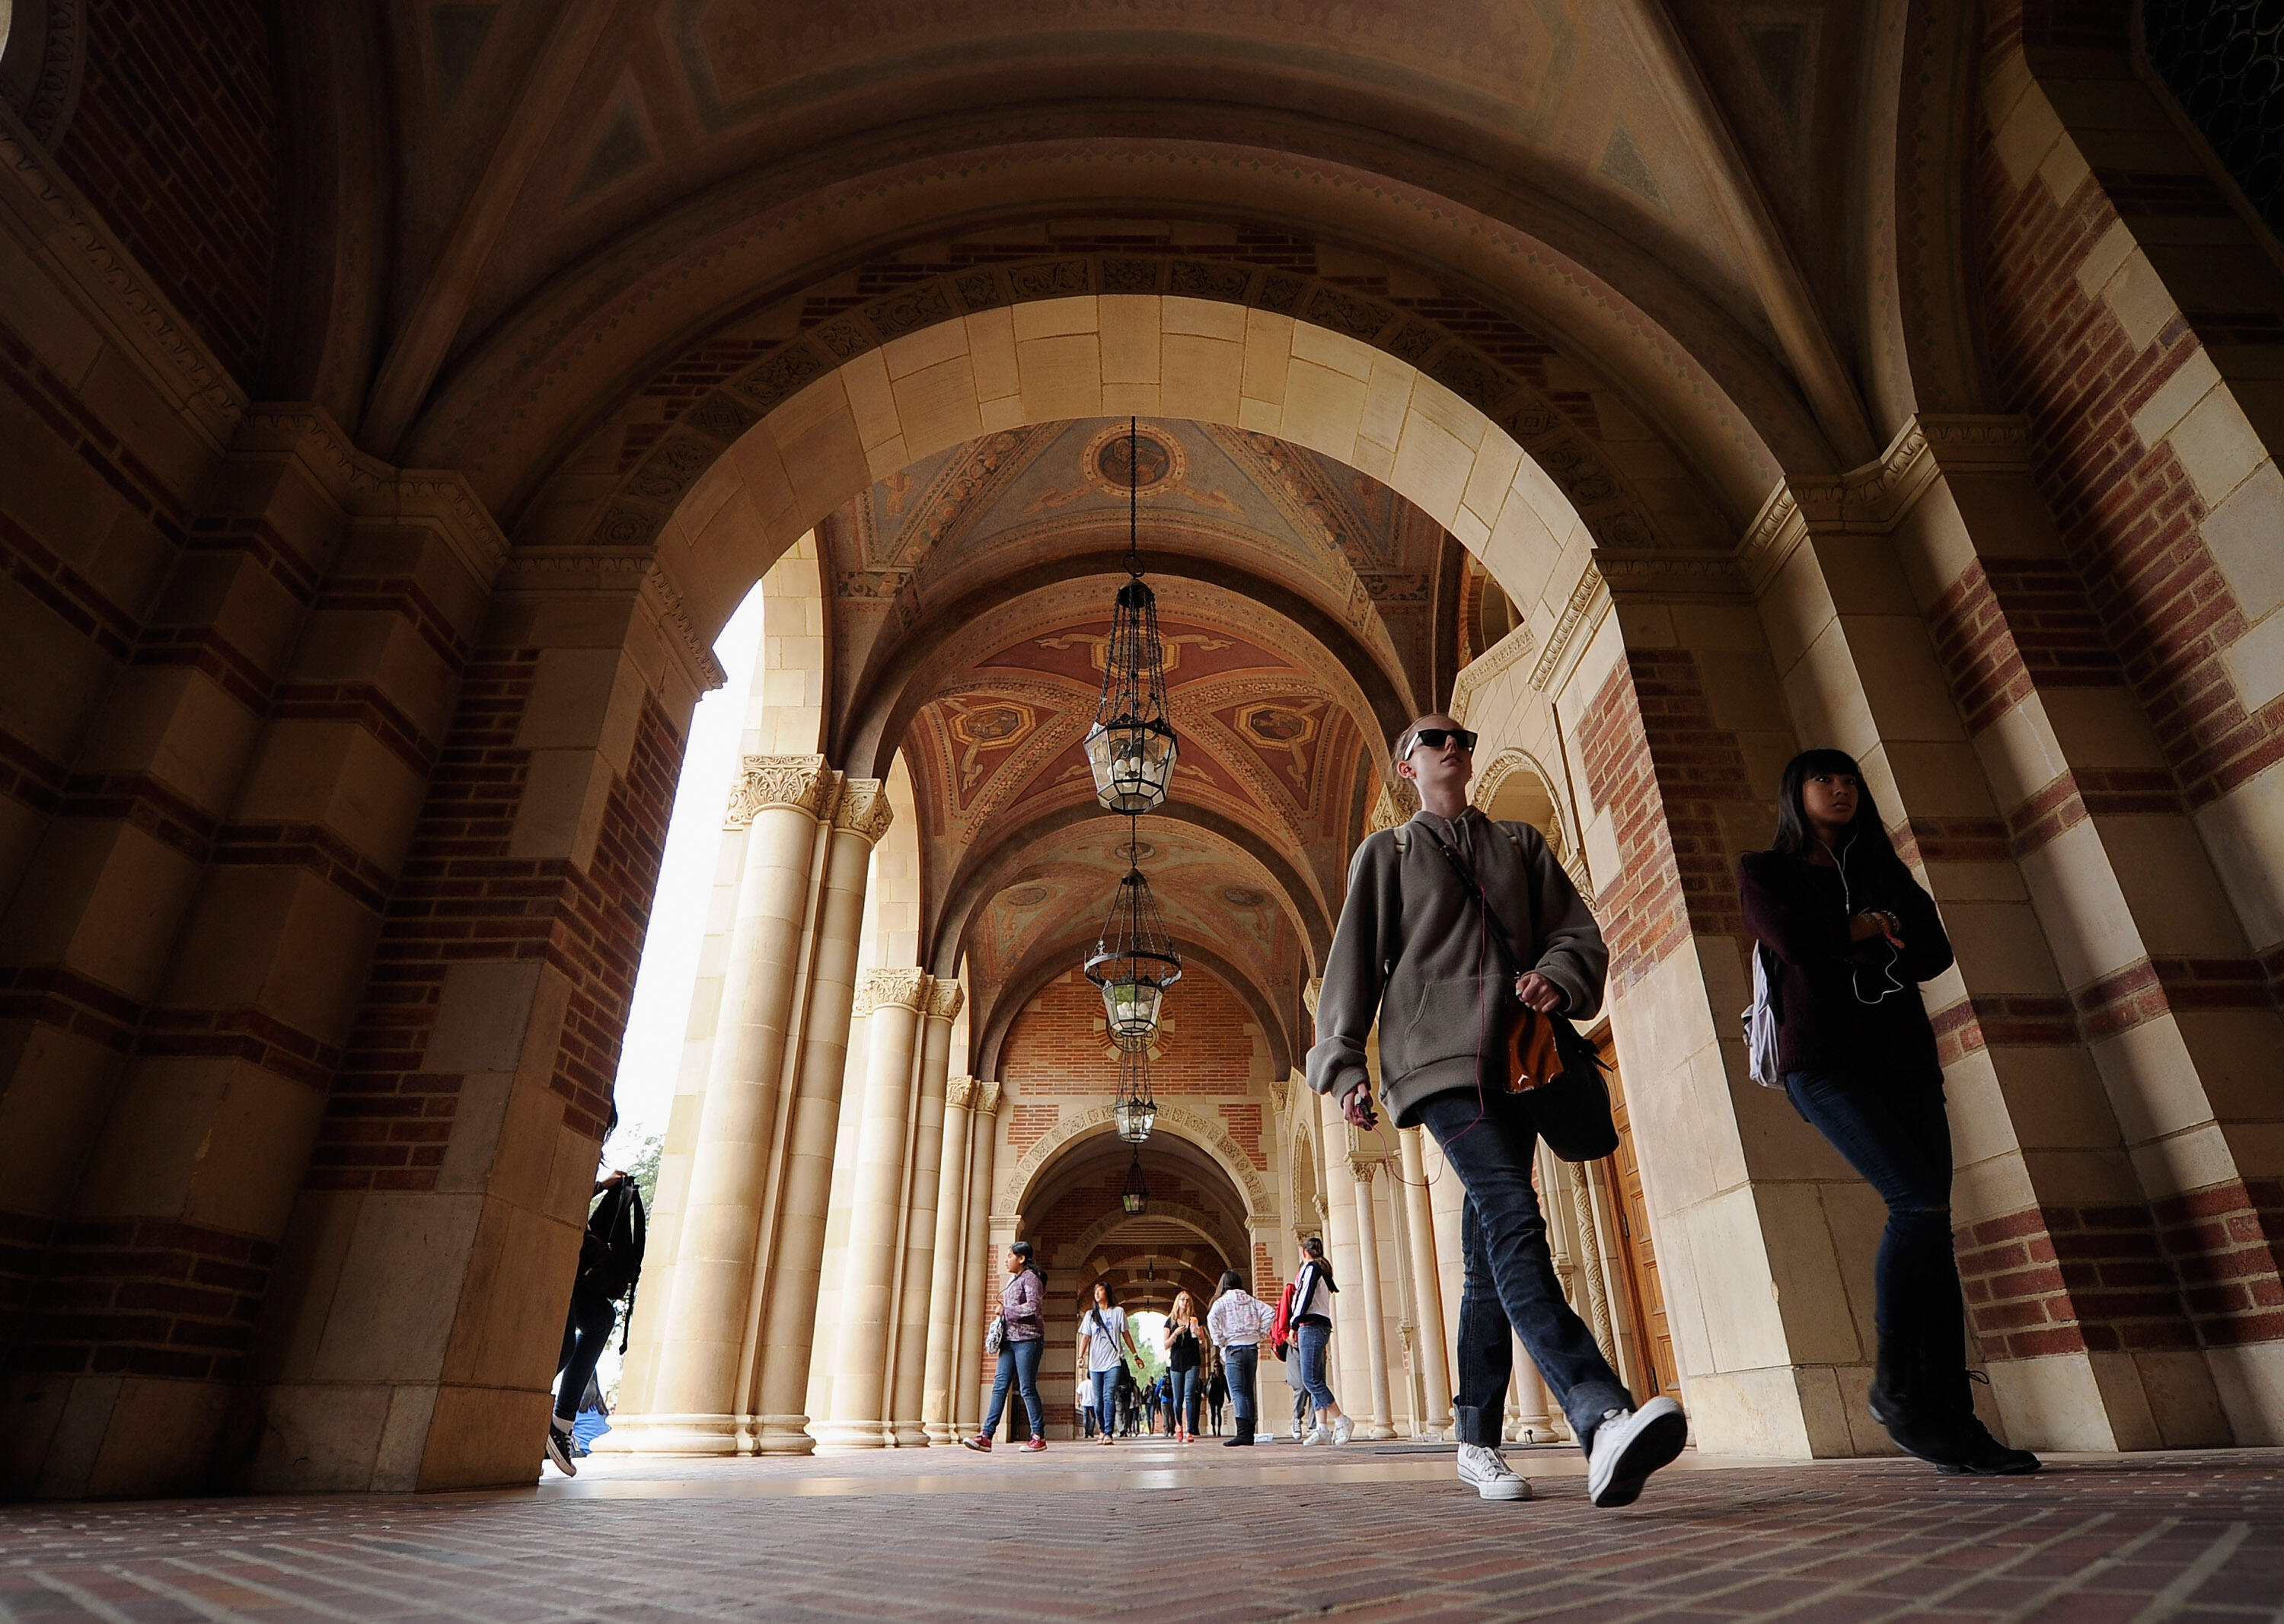 LOS ANGELES, CA - APRIL 23:  Students walk near Royce Hall on the campus of UCLA on April 23, 2012 in Los Angeles, California. According to reports, half of recent college graduates with bachelor's degrees are finding themselves underemployed or jobless. 